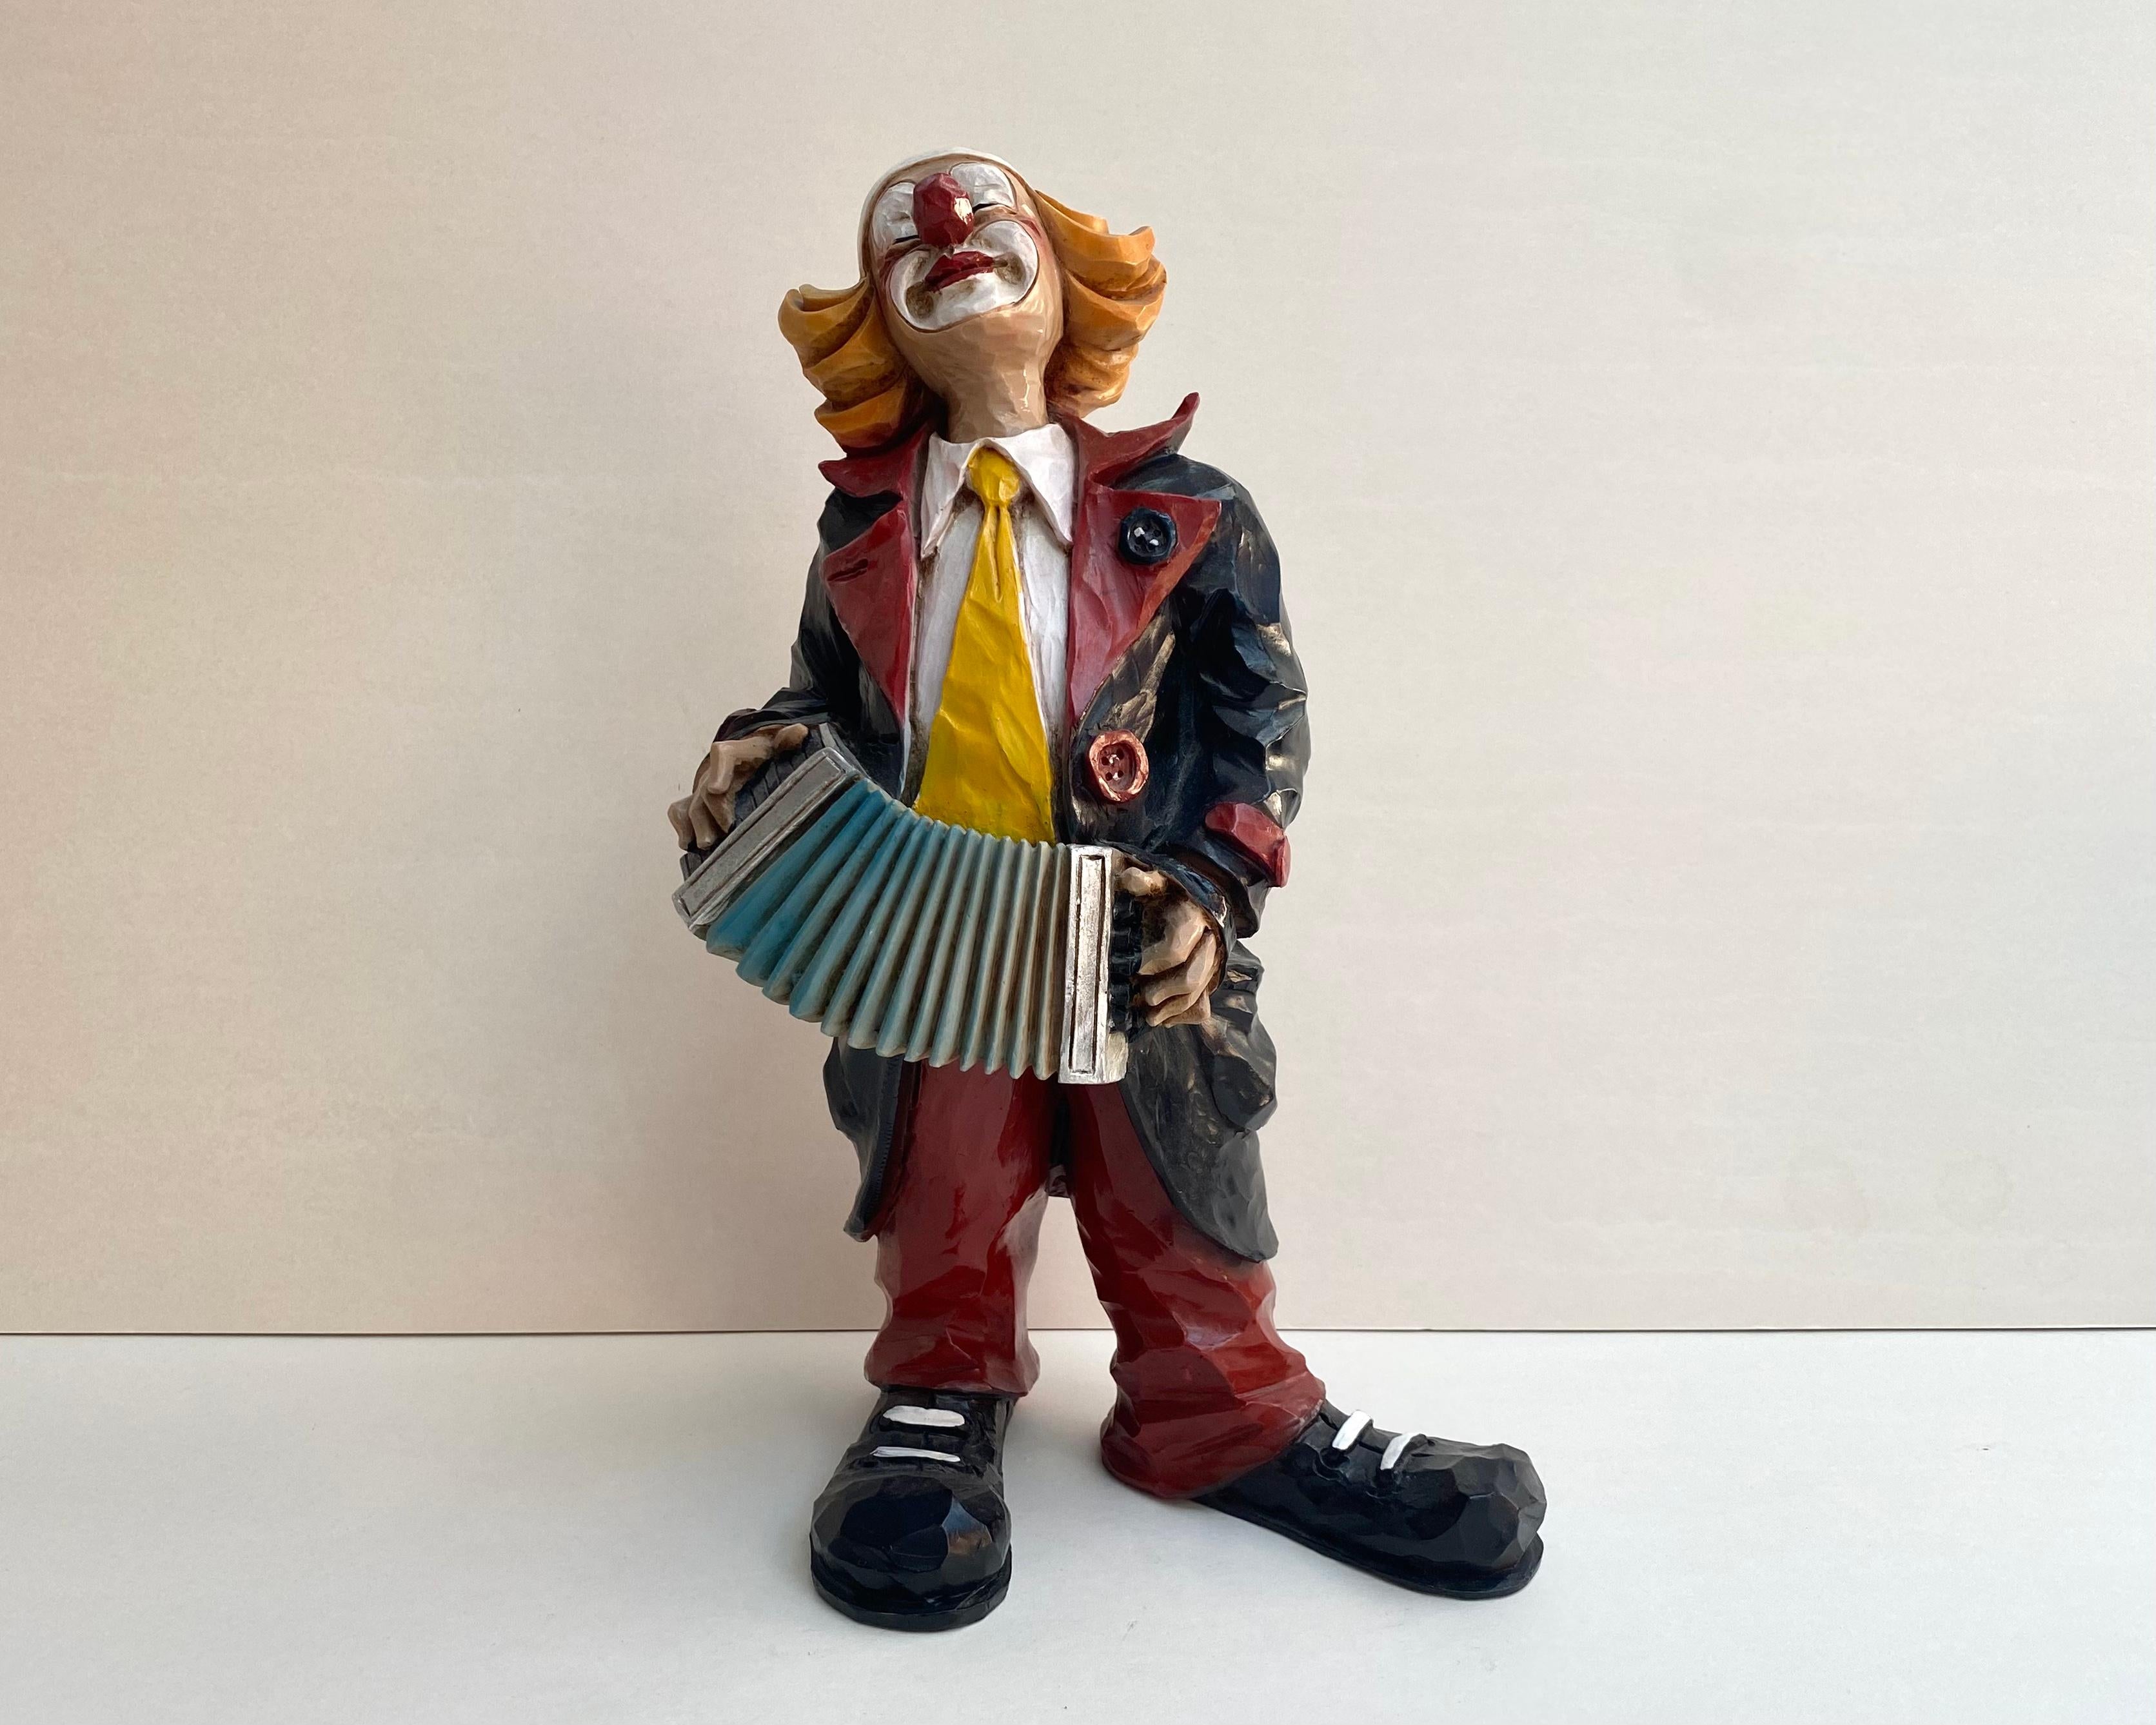 Vintage, rare figurine of a hand-painted porcelain clown with an accordion in his hands by Vivian C, Italy, 1980s.
 
Clothing, as befits a clown, flashy and colorful, with a tie that is too big.

Memories of fun hours at the circus are